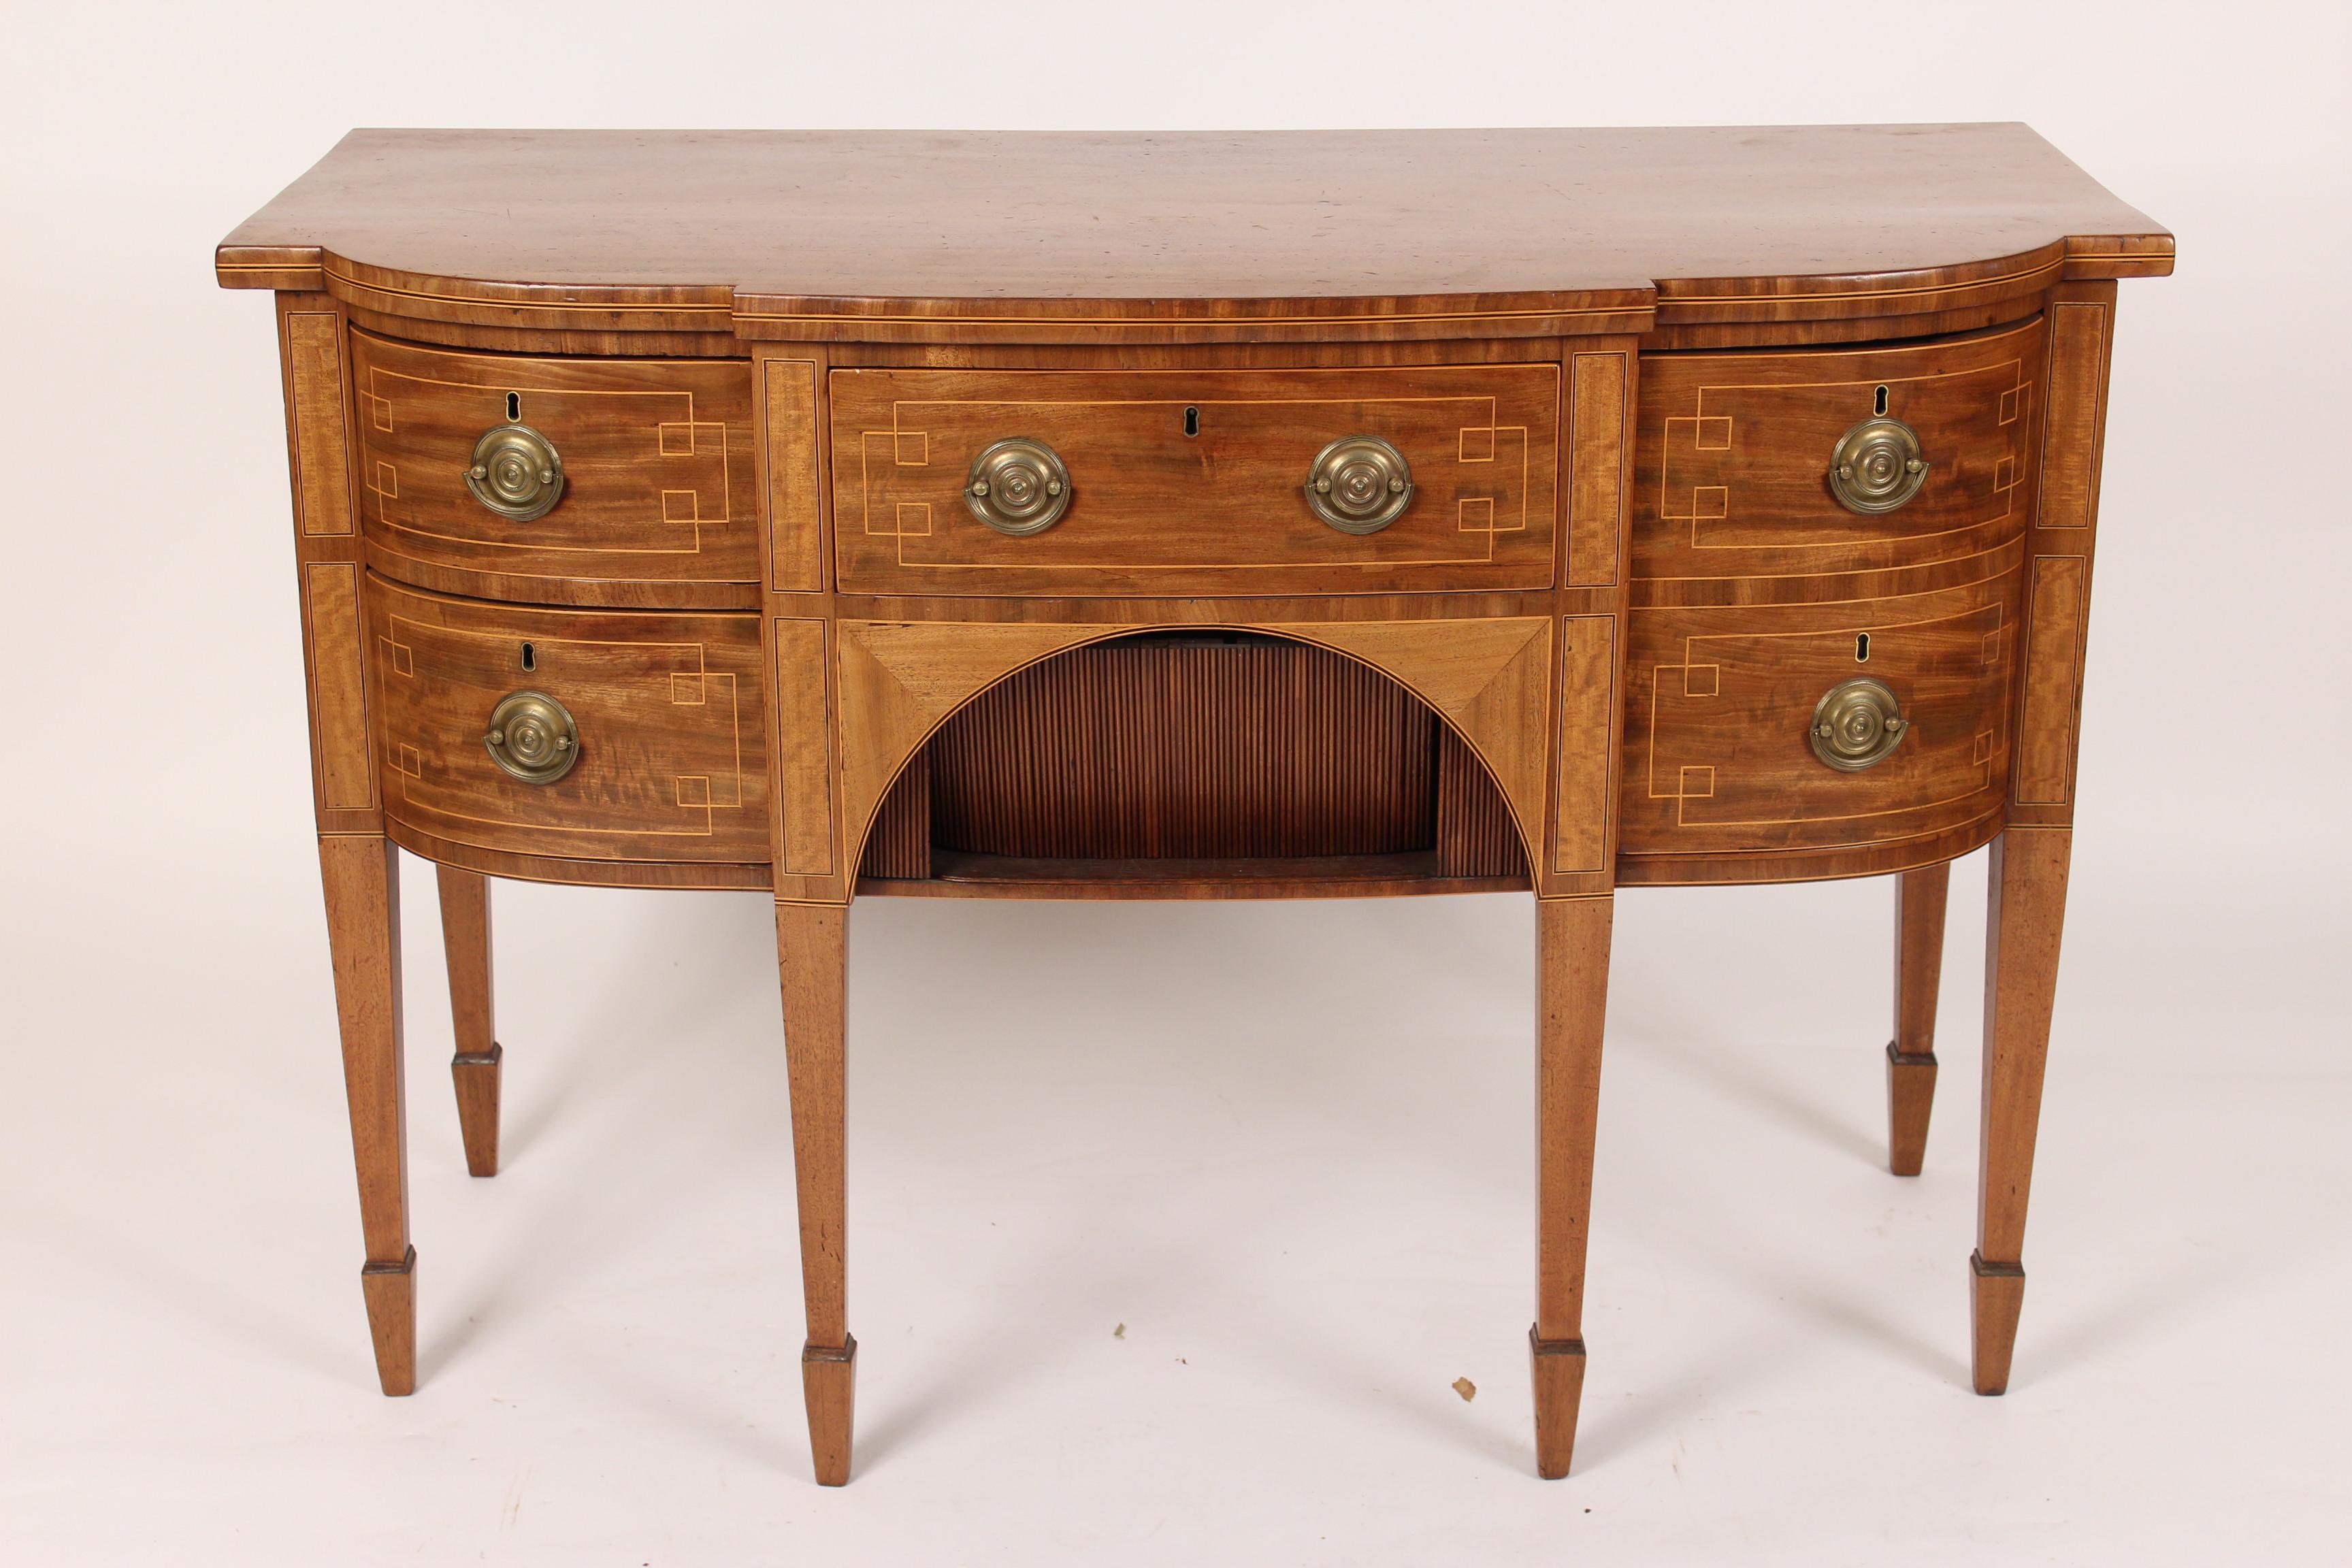 George III mahogany sideboard server, early 19th century. With well figured mahogany drawer fronts , a tambour door beneath the center drawer, string inlay and square tapered legs terminating in spade feet.